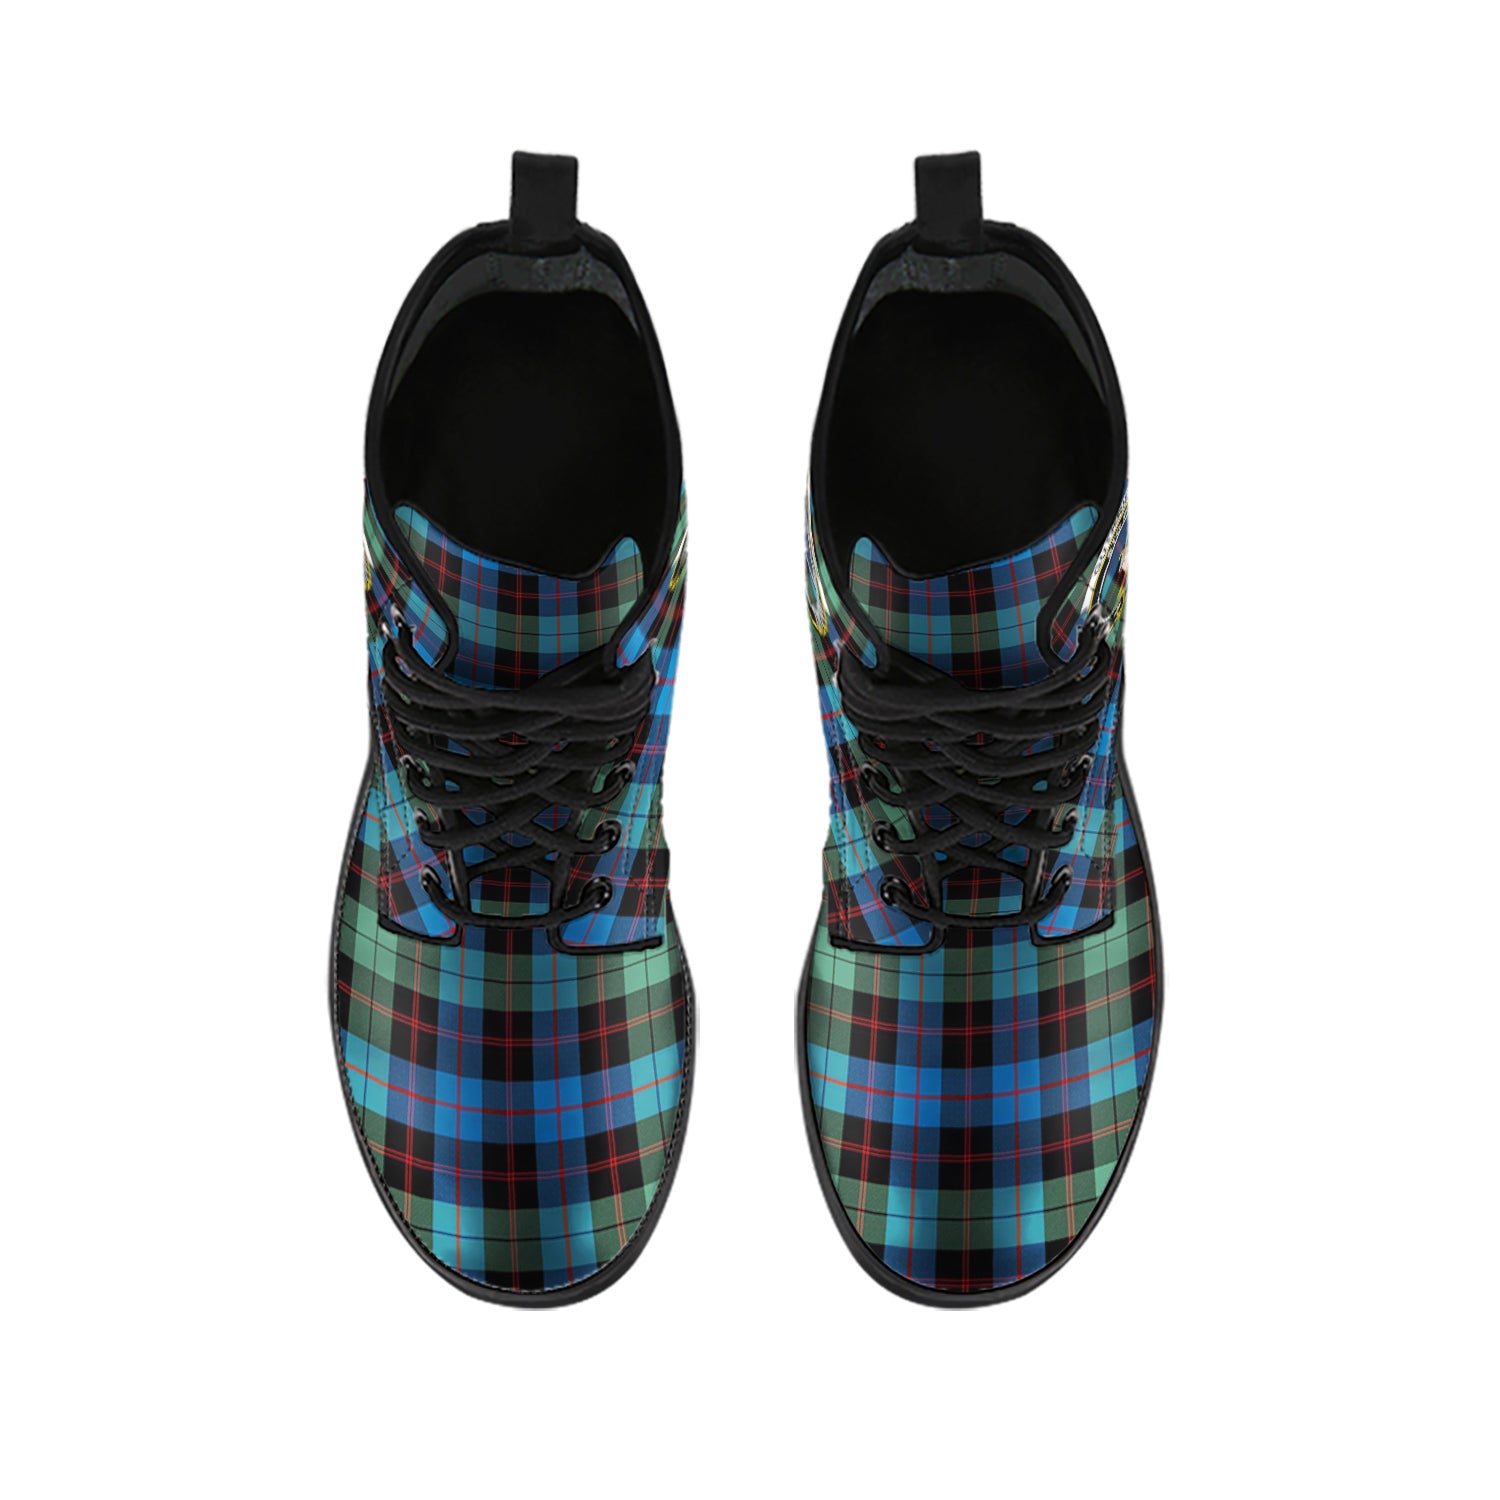 guthrie-ancient-tartan-leather-boots-with-family-crest